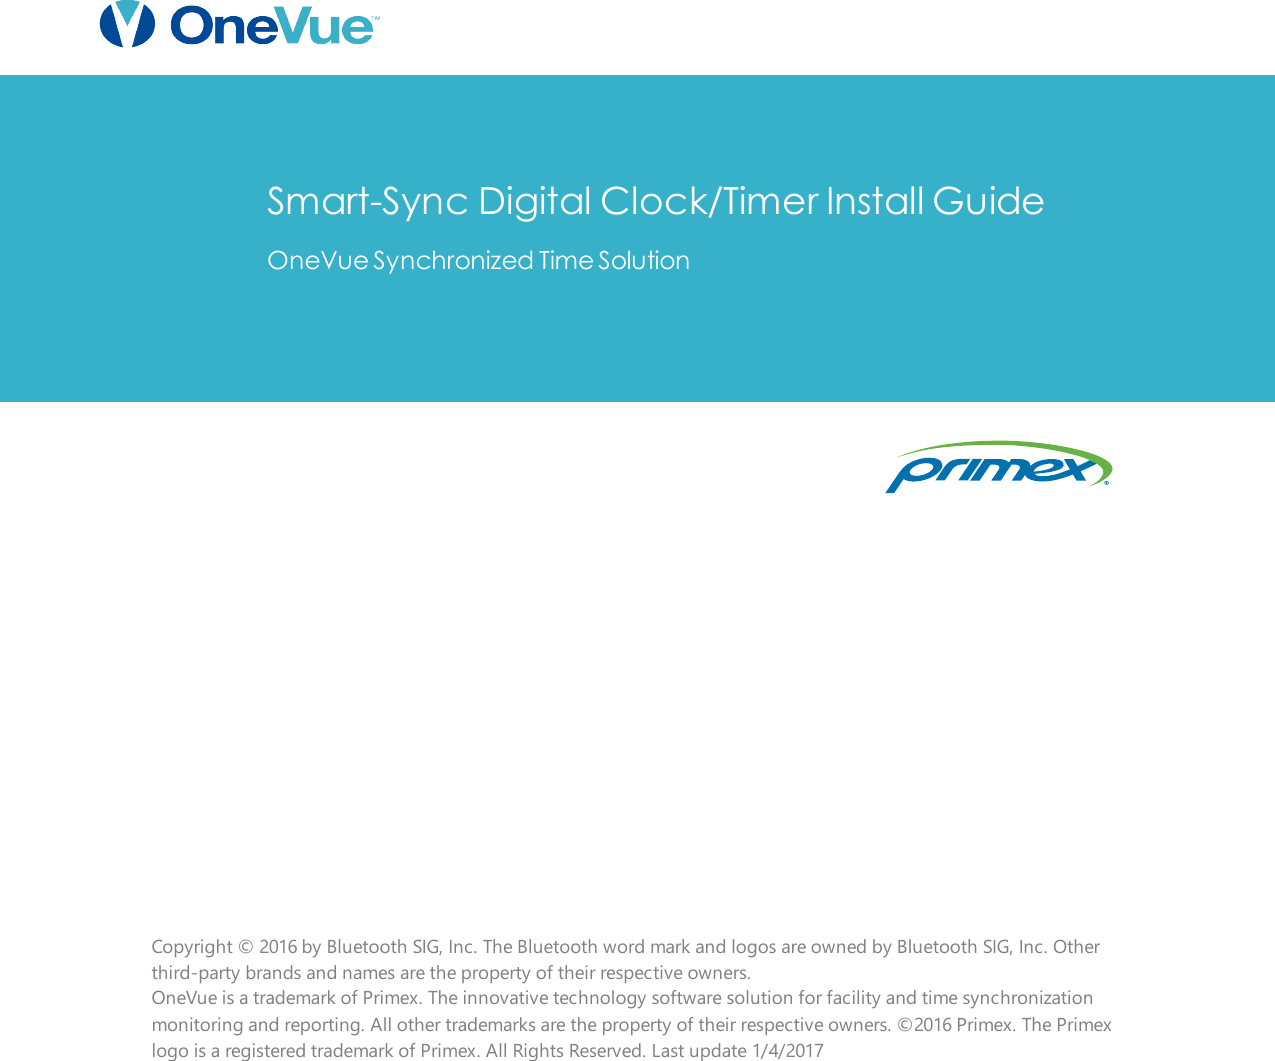 Smart-Sync Digital Clock/Timer Install GuideOneVue Synchronized Time SolutionCopyright © 2016 by Bluetooth SIG, Inc. The Bluetooth word mark and logos are owned by Bluetooth SIG, Inc. Otherthird-party brands and names are the property of their respective owners.OneVue is a trademark of Primex. The innovative technology software solution for facility and time synchronizationmonitoring and reporting. All other trademarks are the property of their respective owners. ©2016 Primex. The Primexlogo is a registered trademark of Primex. All Rights Reserved. Last update 1/4/2017